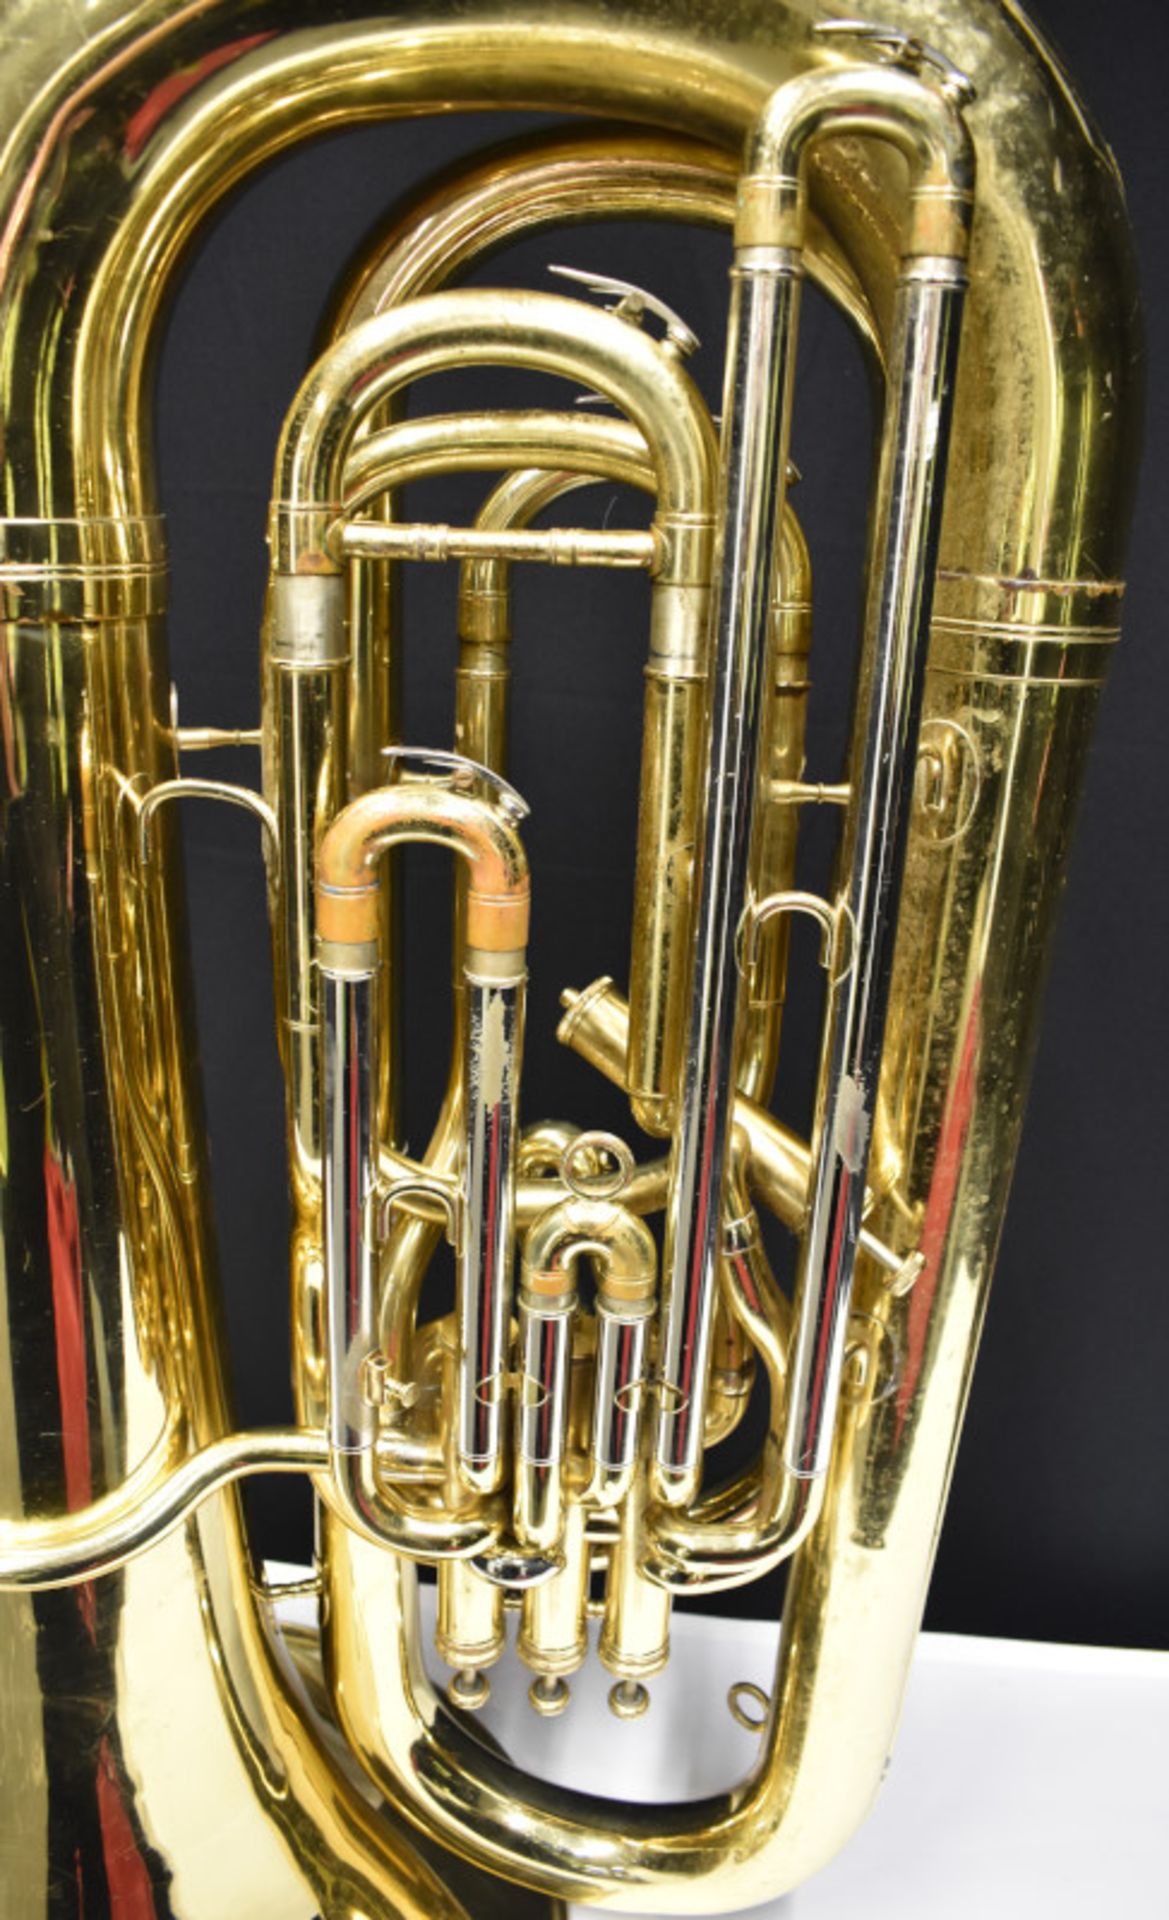 Besson Sovereign BE994 Tuba in Besson Case (case damaged no wheels) - Serial No. 883092 - - Image 15 of 21